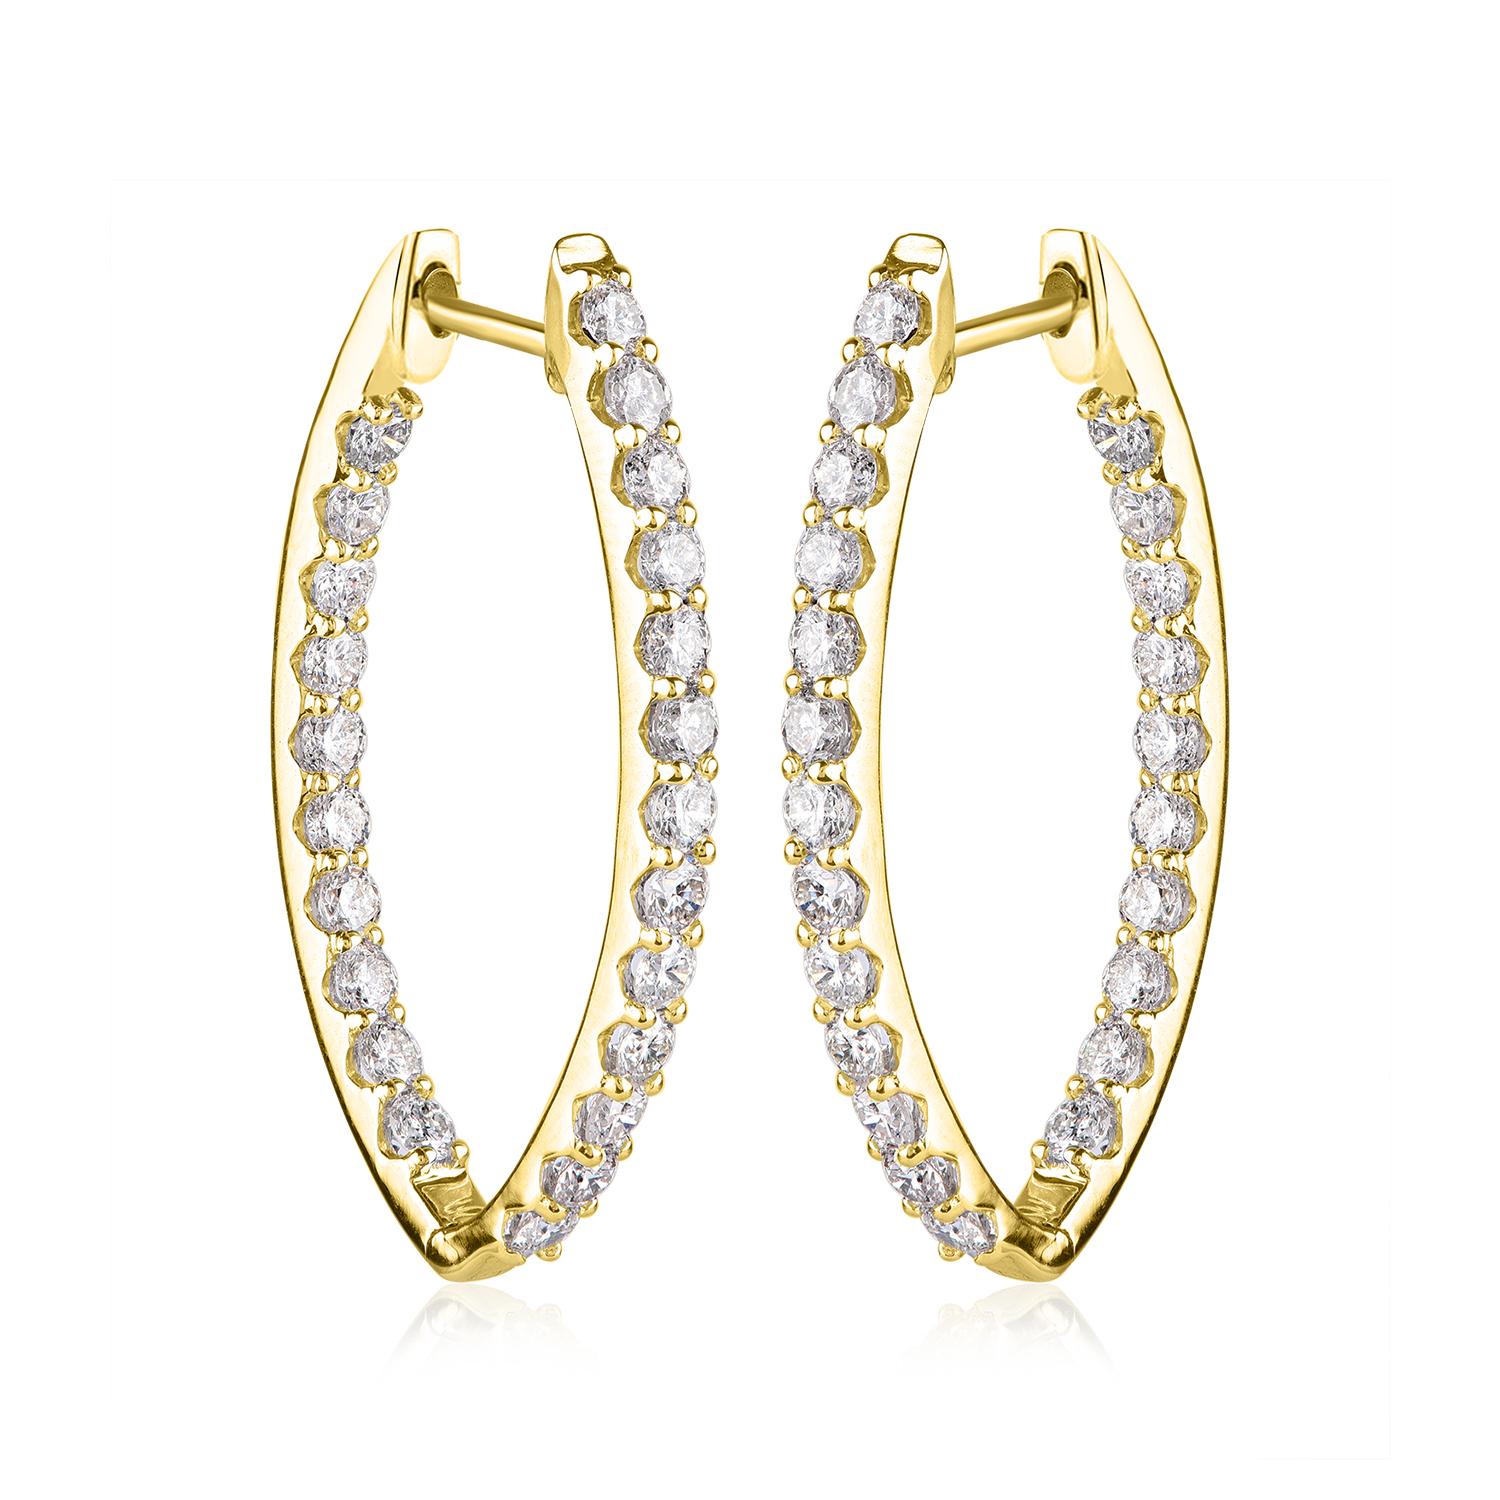 Round Cut TJD 3.00 Carat Round Diamond 18K Yellow Gold Inside-Out Hoop Huggie Earrings For Sale